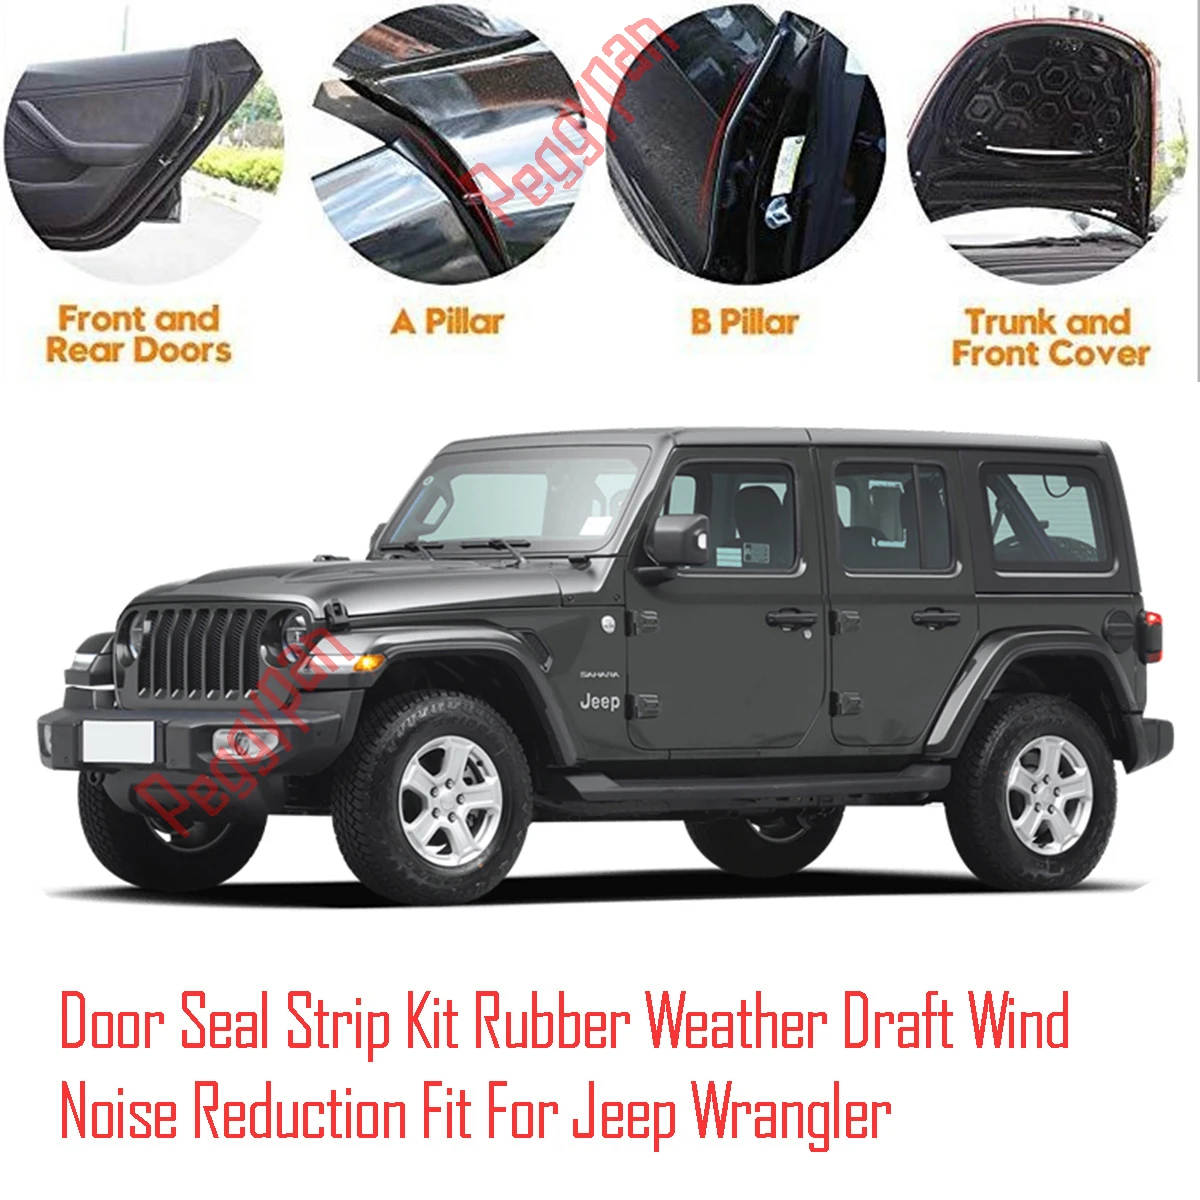 Door Seal Strip Kit Self Adhesive Window Engine Cover Soundproof Rubber  Weather Draft Wind Noise Reduction Fit For Jeep Wrangler|Fillers, Adhesives  & Sealants| - AliExpress